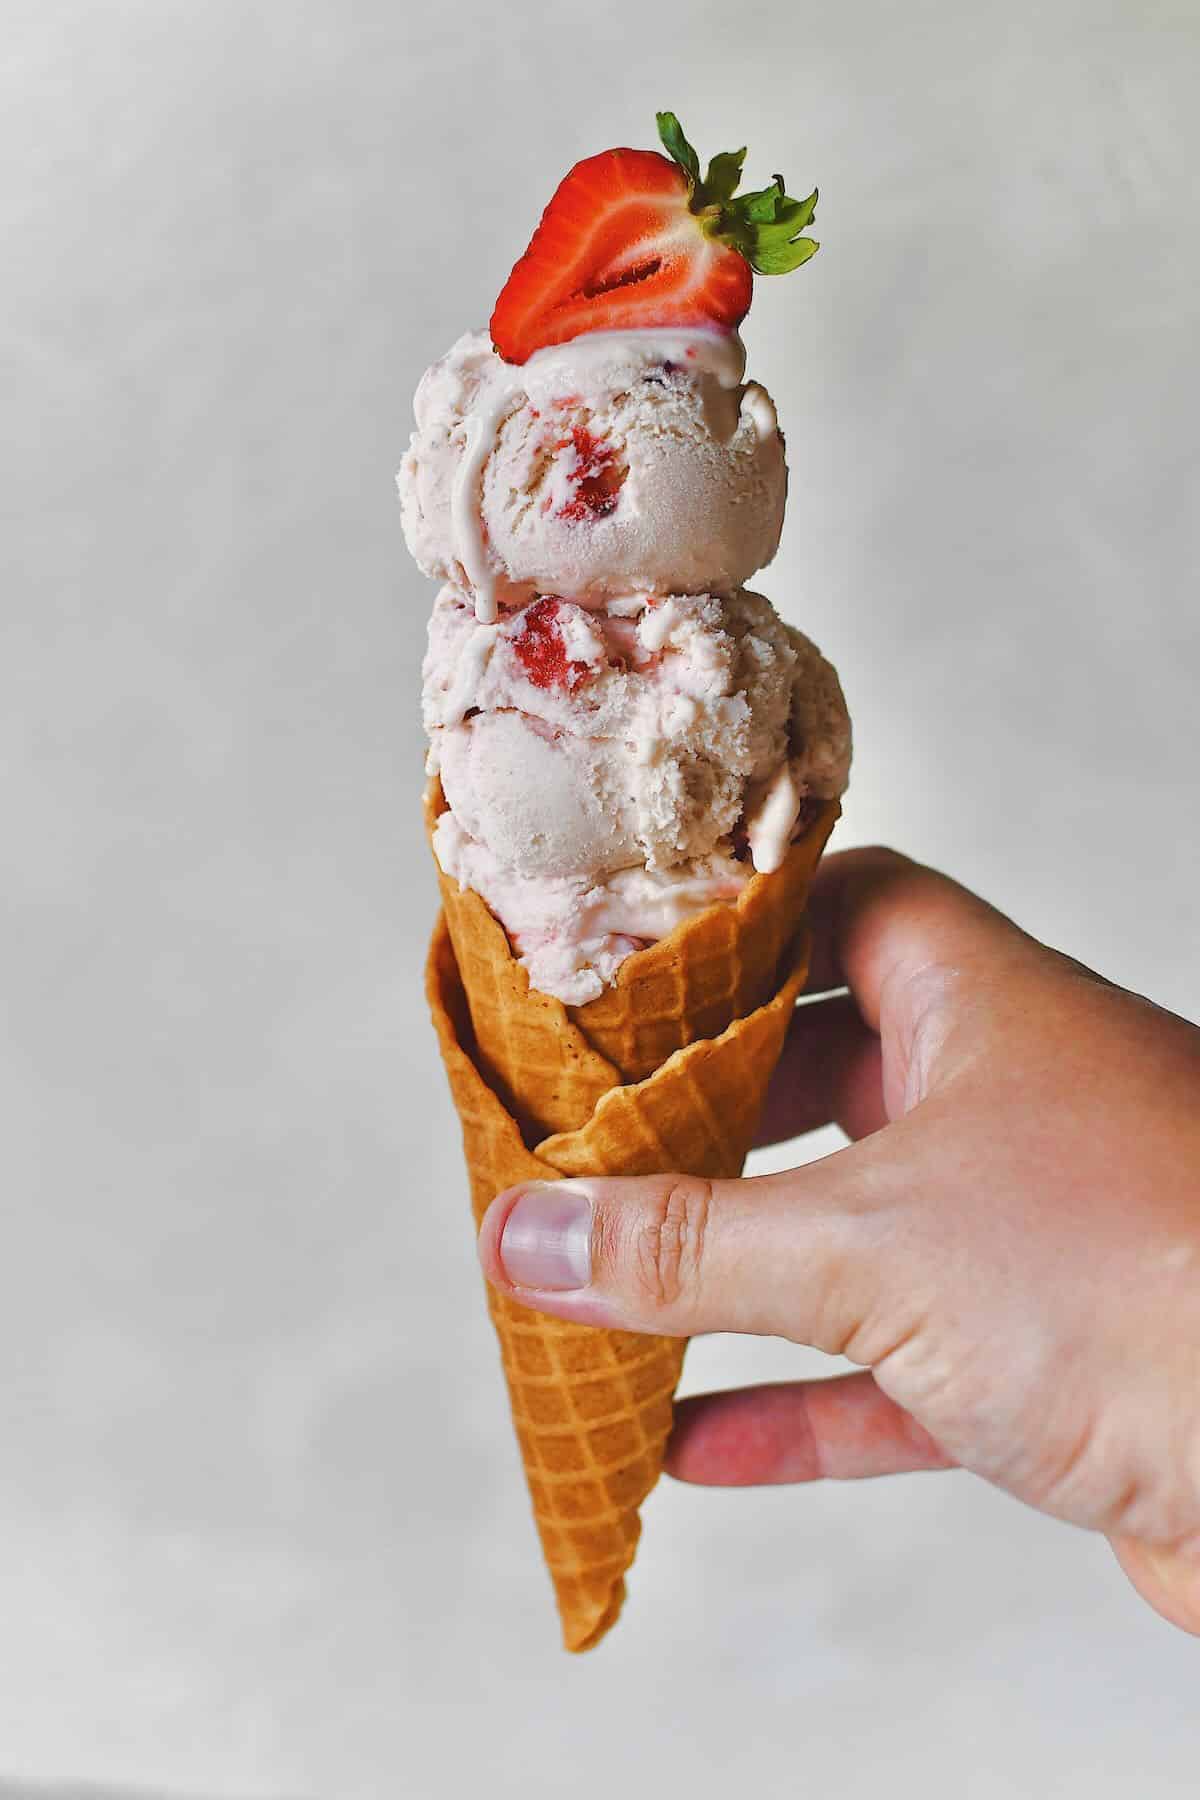 Strawberry Ice Cream served in a cone and being handed off.